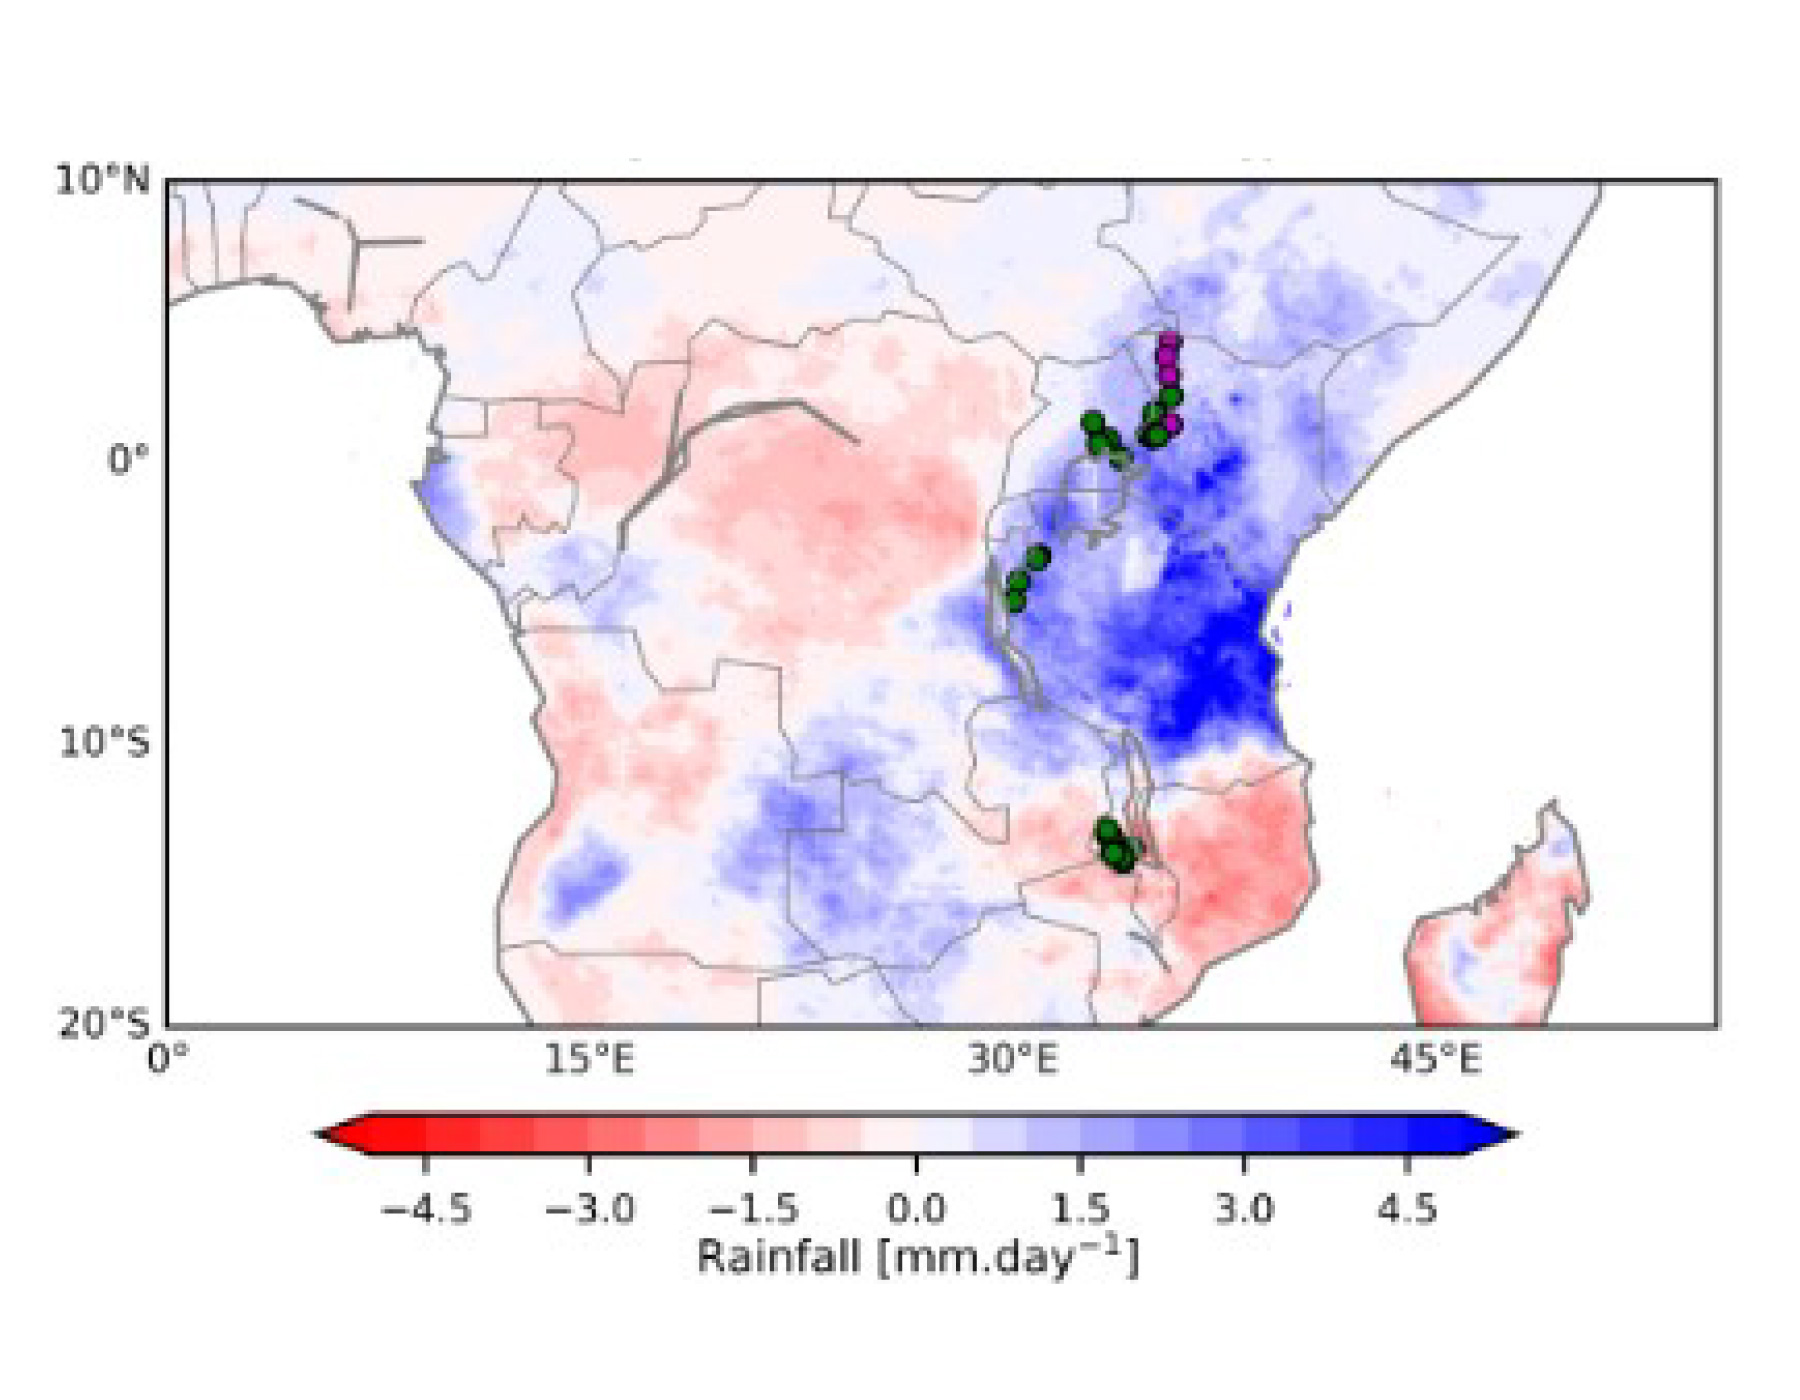 Analysis of rainfall anomalies during the period from January to April 2020 against 1983-2012 climatology indicate unusually high rainfall in Kenya, Uganda, and Tanzania and low levels of rainfall in Malawi. Green dots indicate locations of piped schemes where a pay-as-you-fetch payment modality is employed. Magenta dots indicate locations of piped schemes where a monthly fee payment modality is employed. (Source: Armstrong, Hope, and Munday 2021)